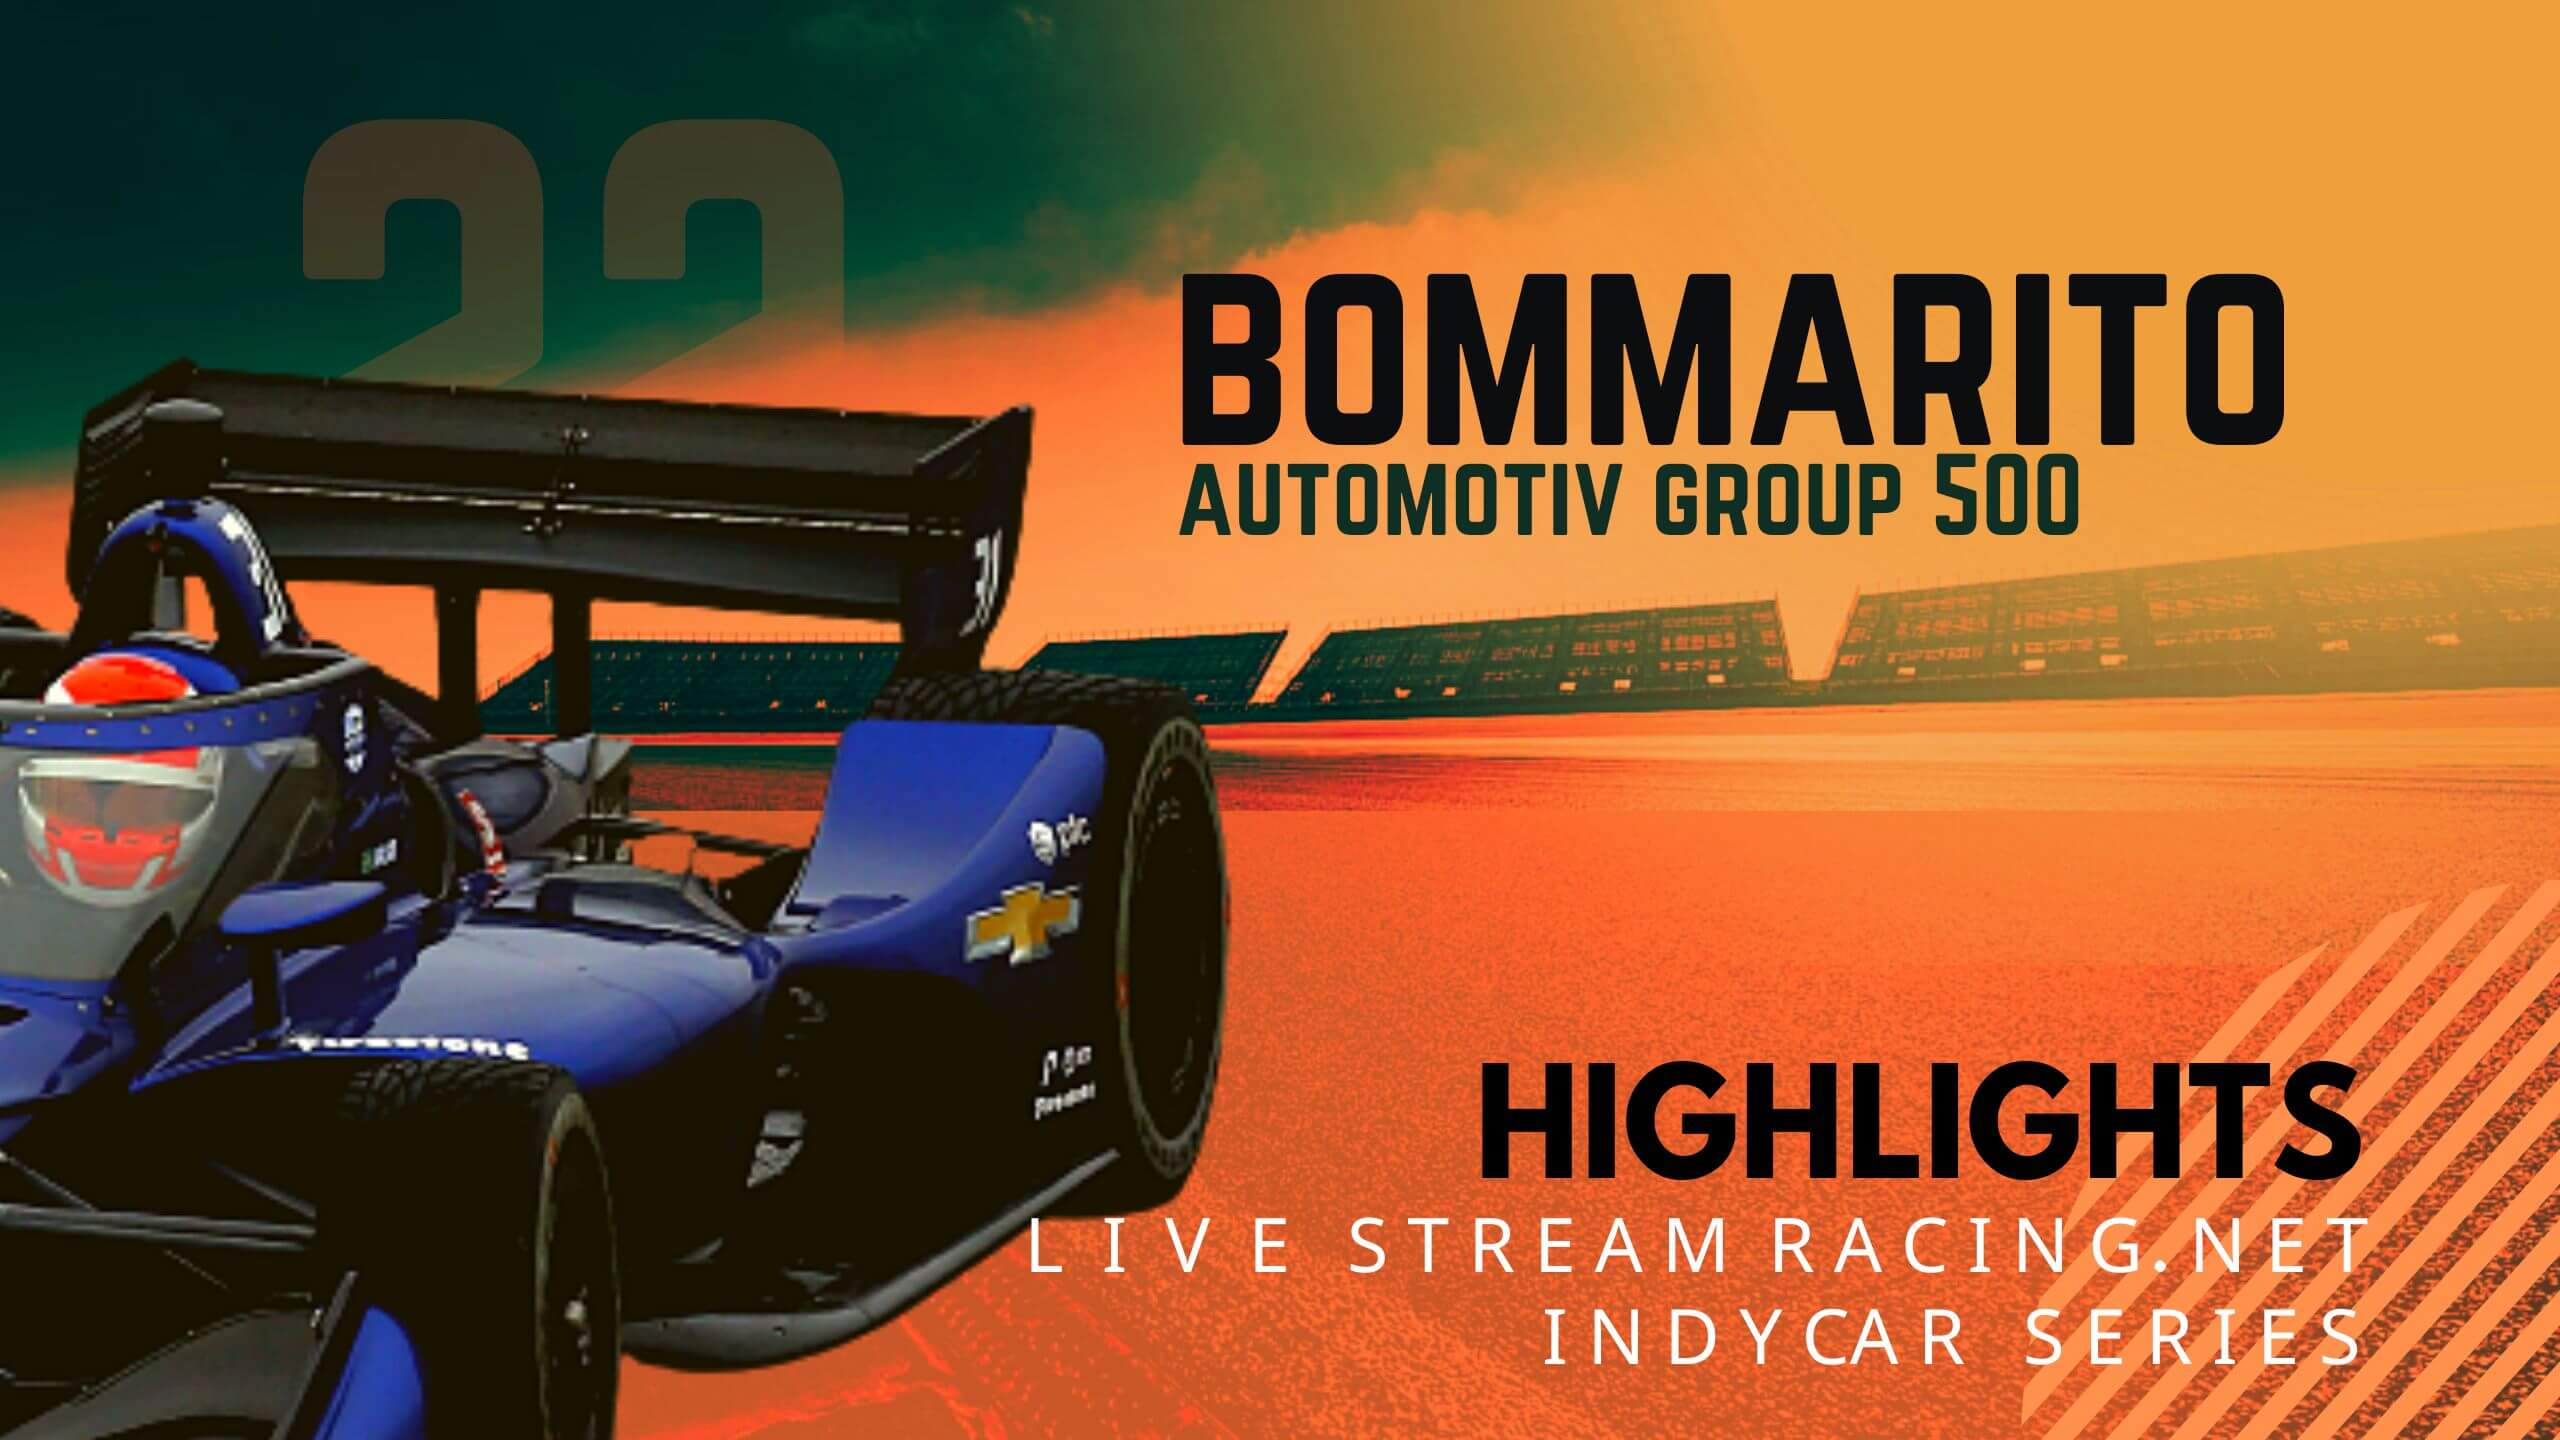 Bommarito Automotive Group 500 Indycar 2022 Highlights Race Replay